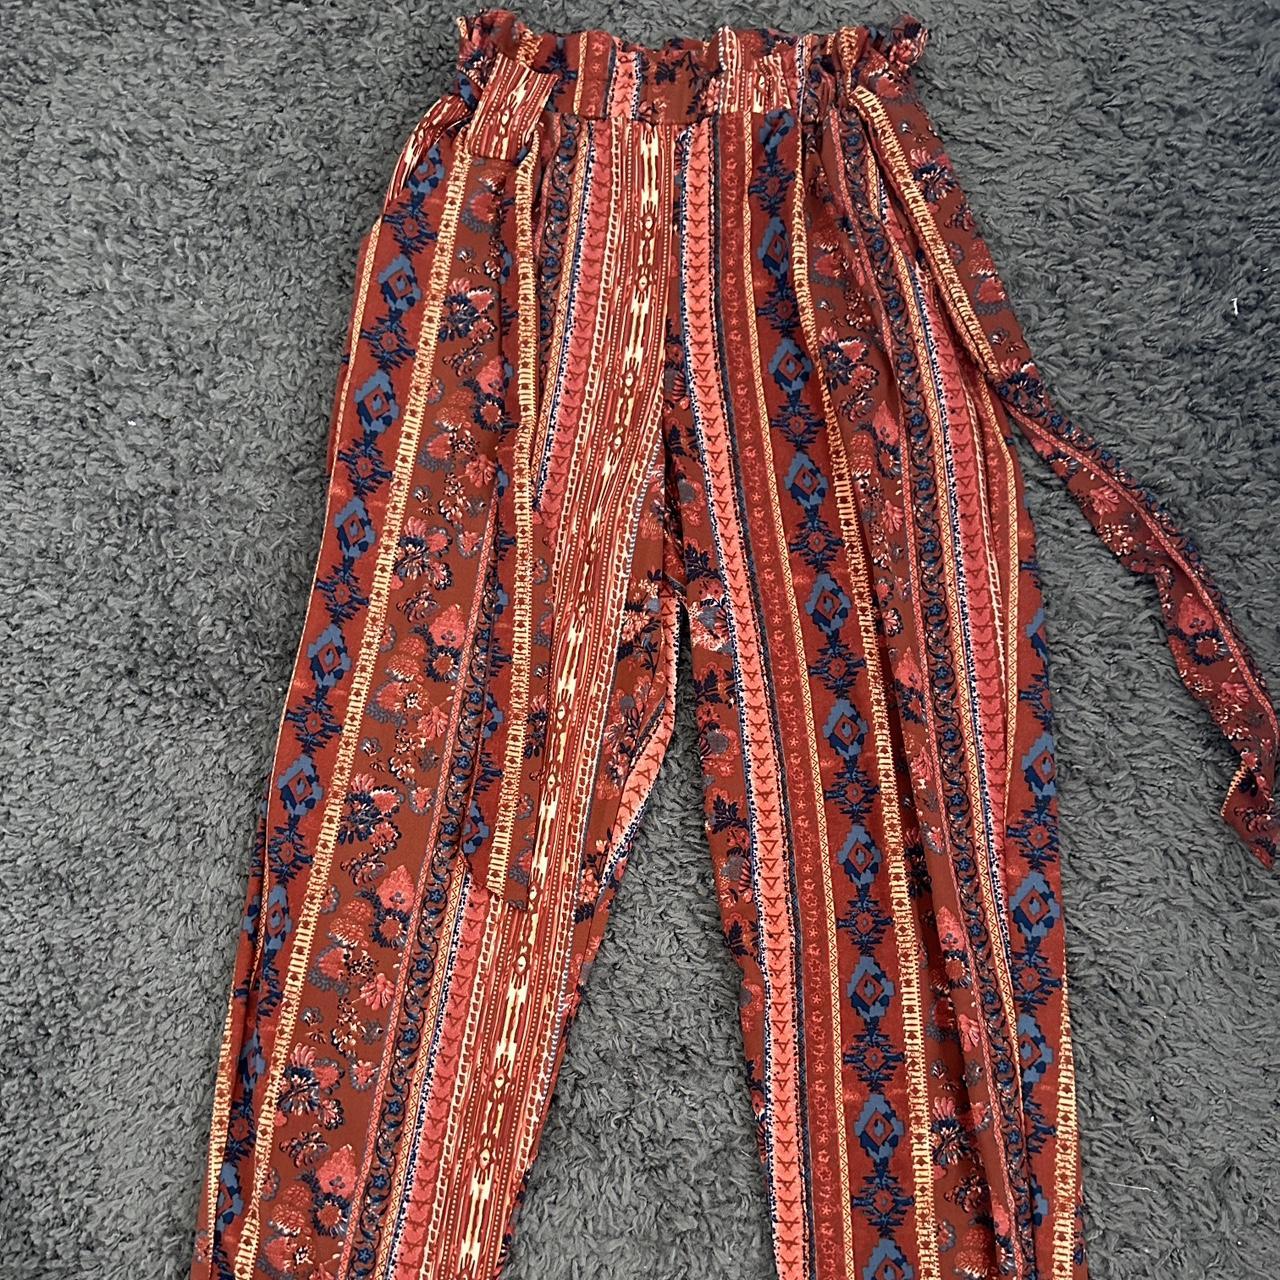 infamous bbl pants/ size small/ worn slightly - Depop